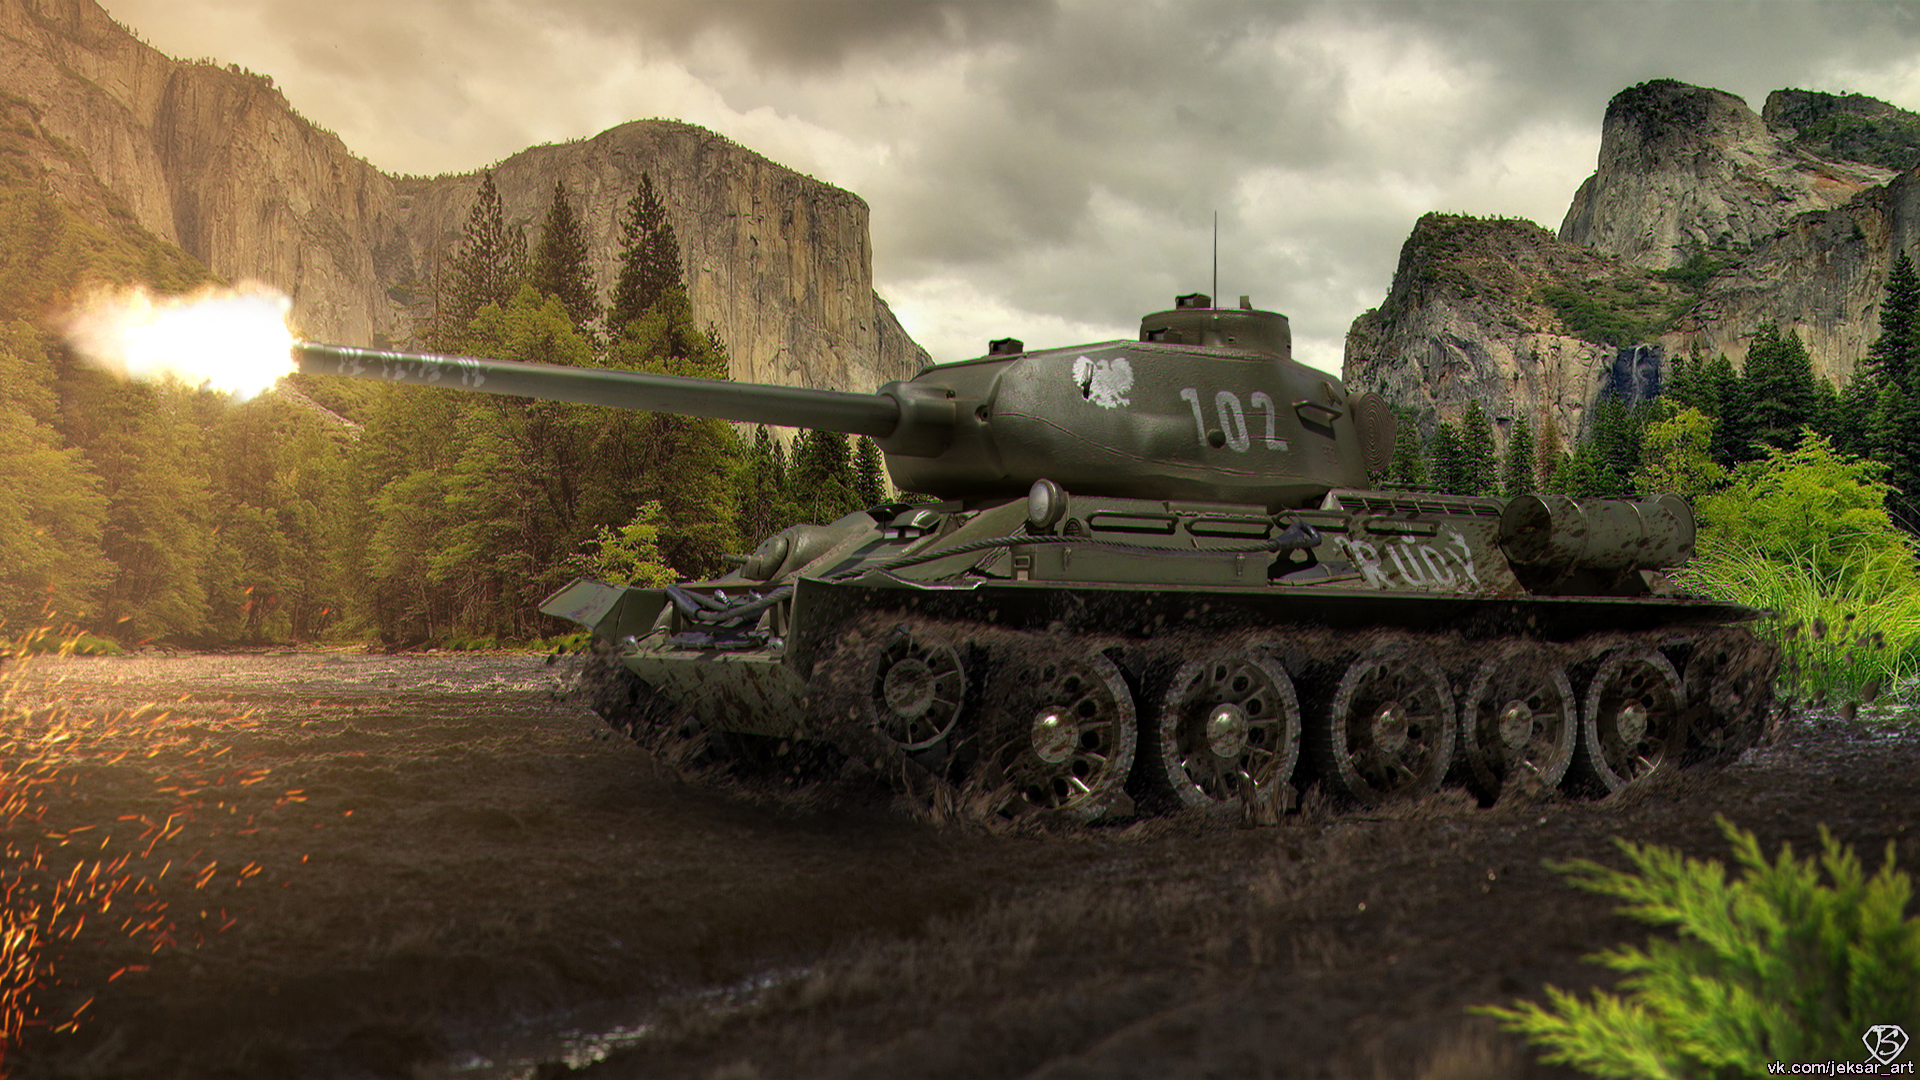 Wot from wit. Т 34 85 Руди. Танк т-34 World of Tanks. Т-34-85 Rudy. Танк т34 WOT.